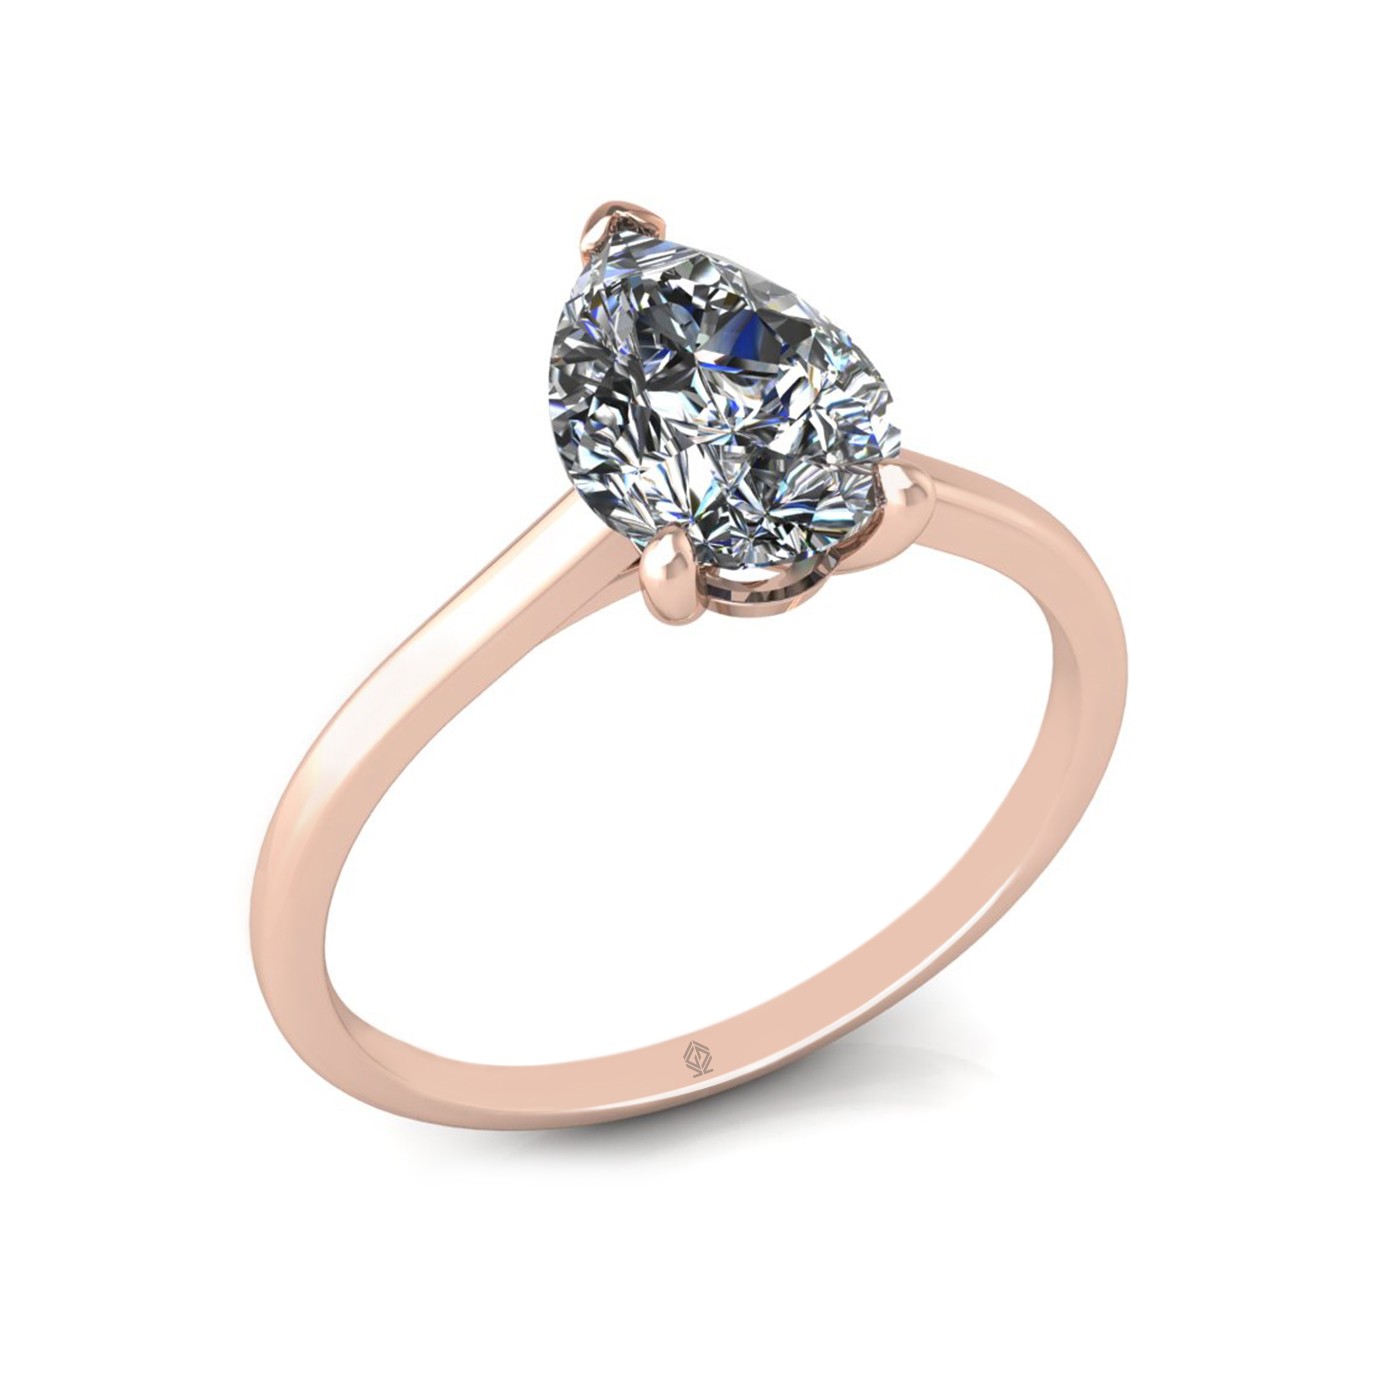 18k rose gold  1,20 ct 3 prongs solitaire pear cut diamond engagement ring with whisper thin band